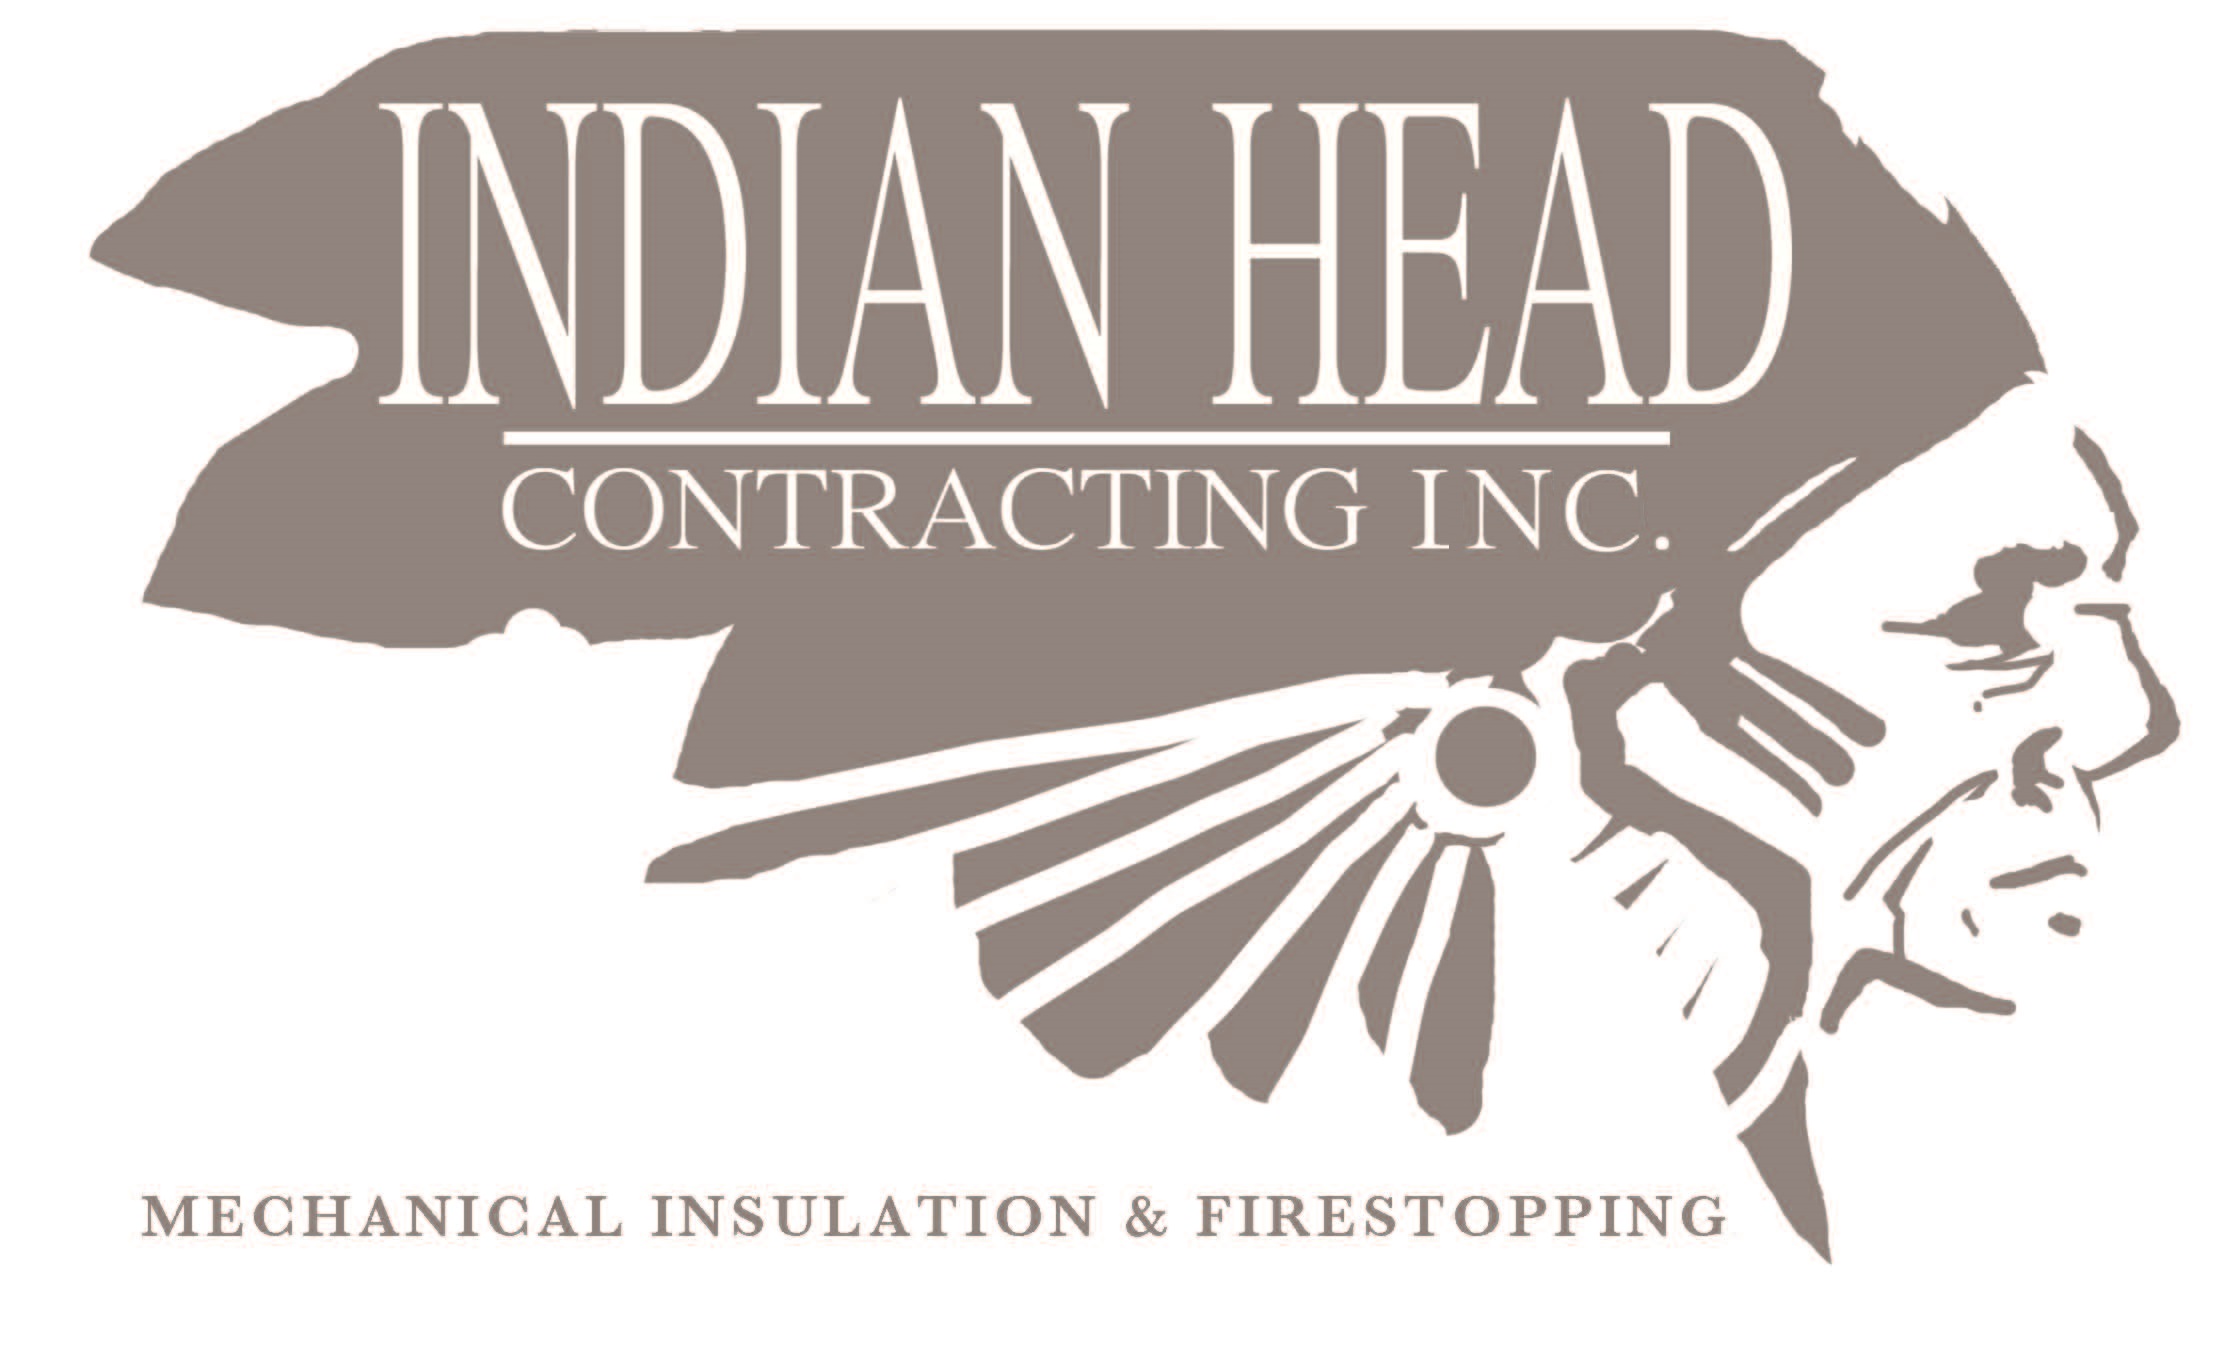 Indian Head Contracting Inc.